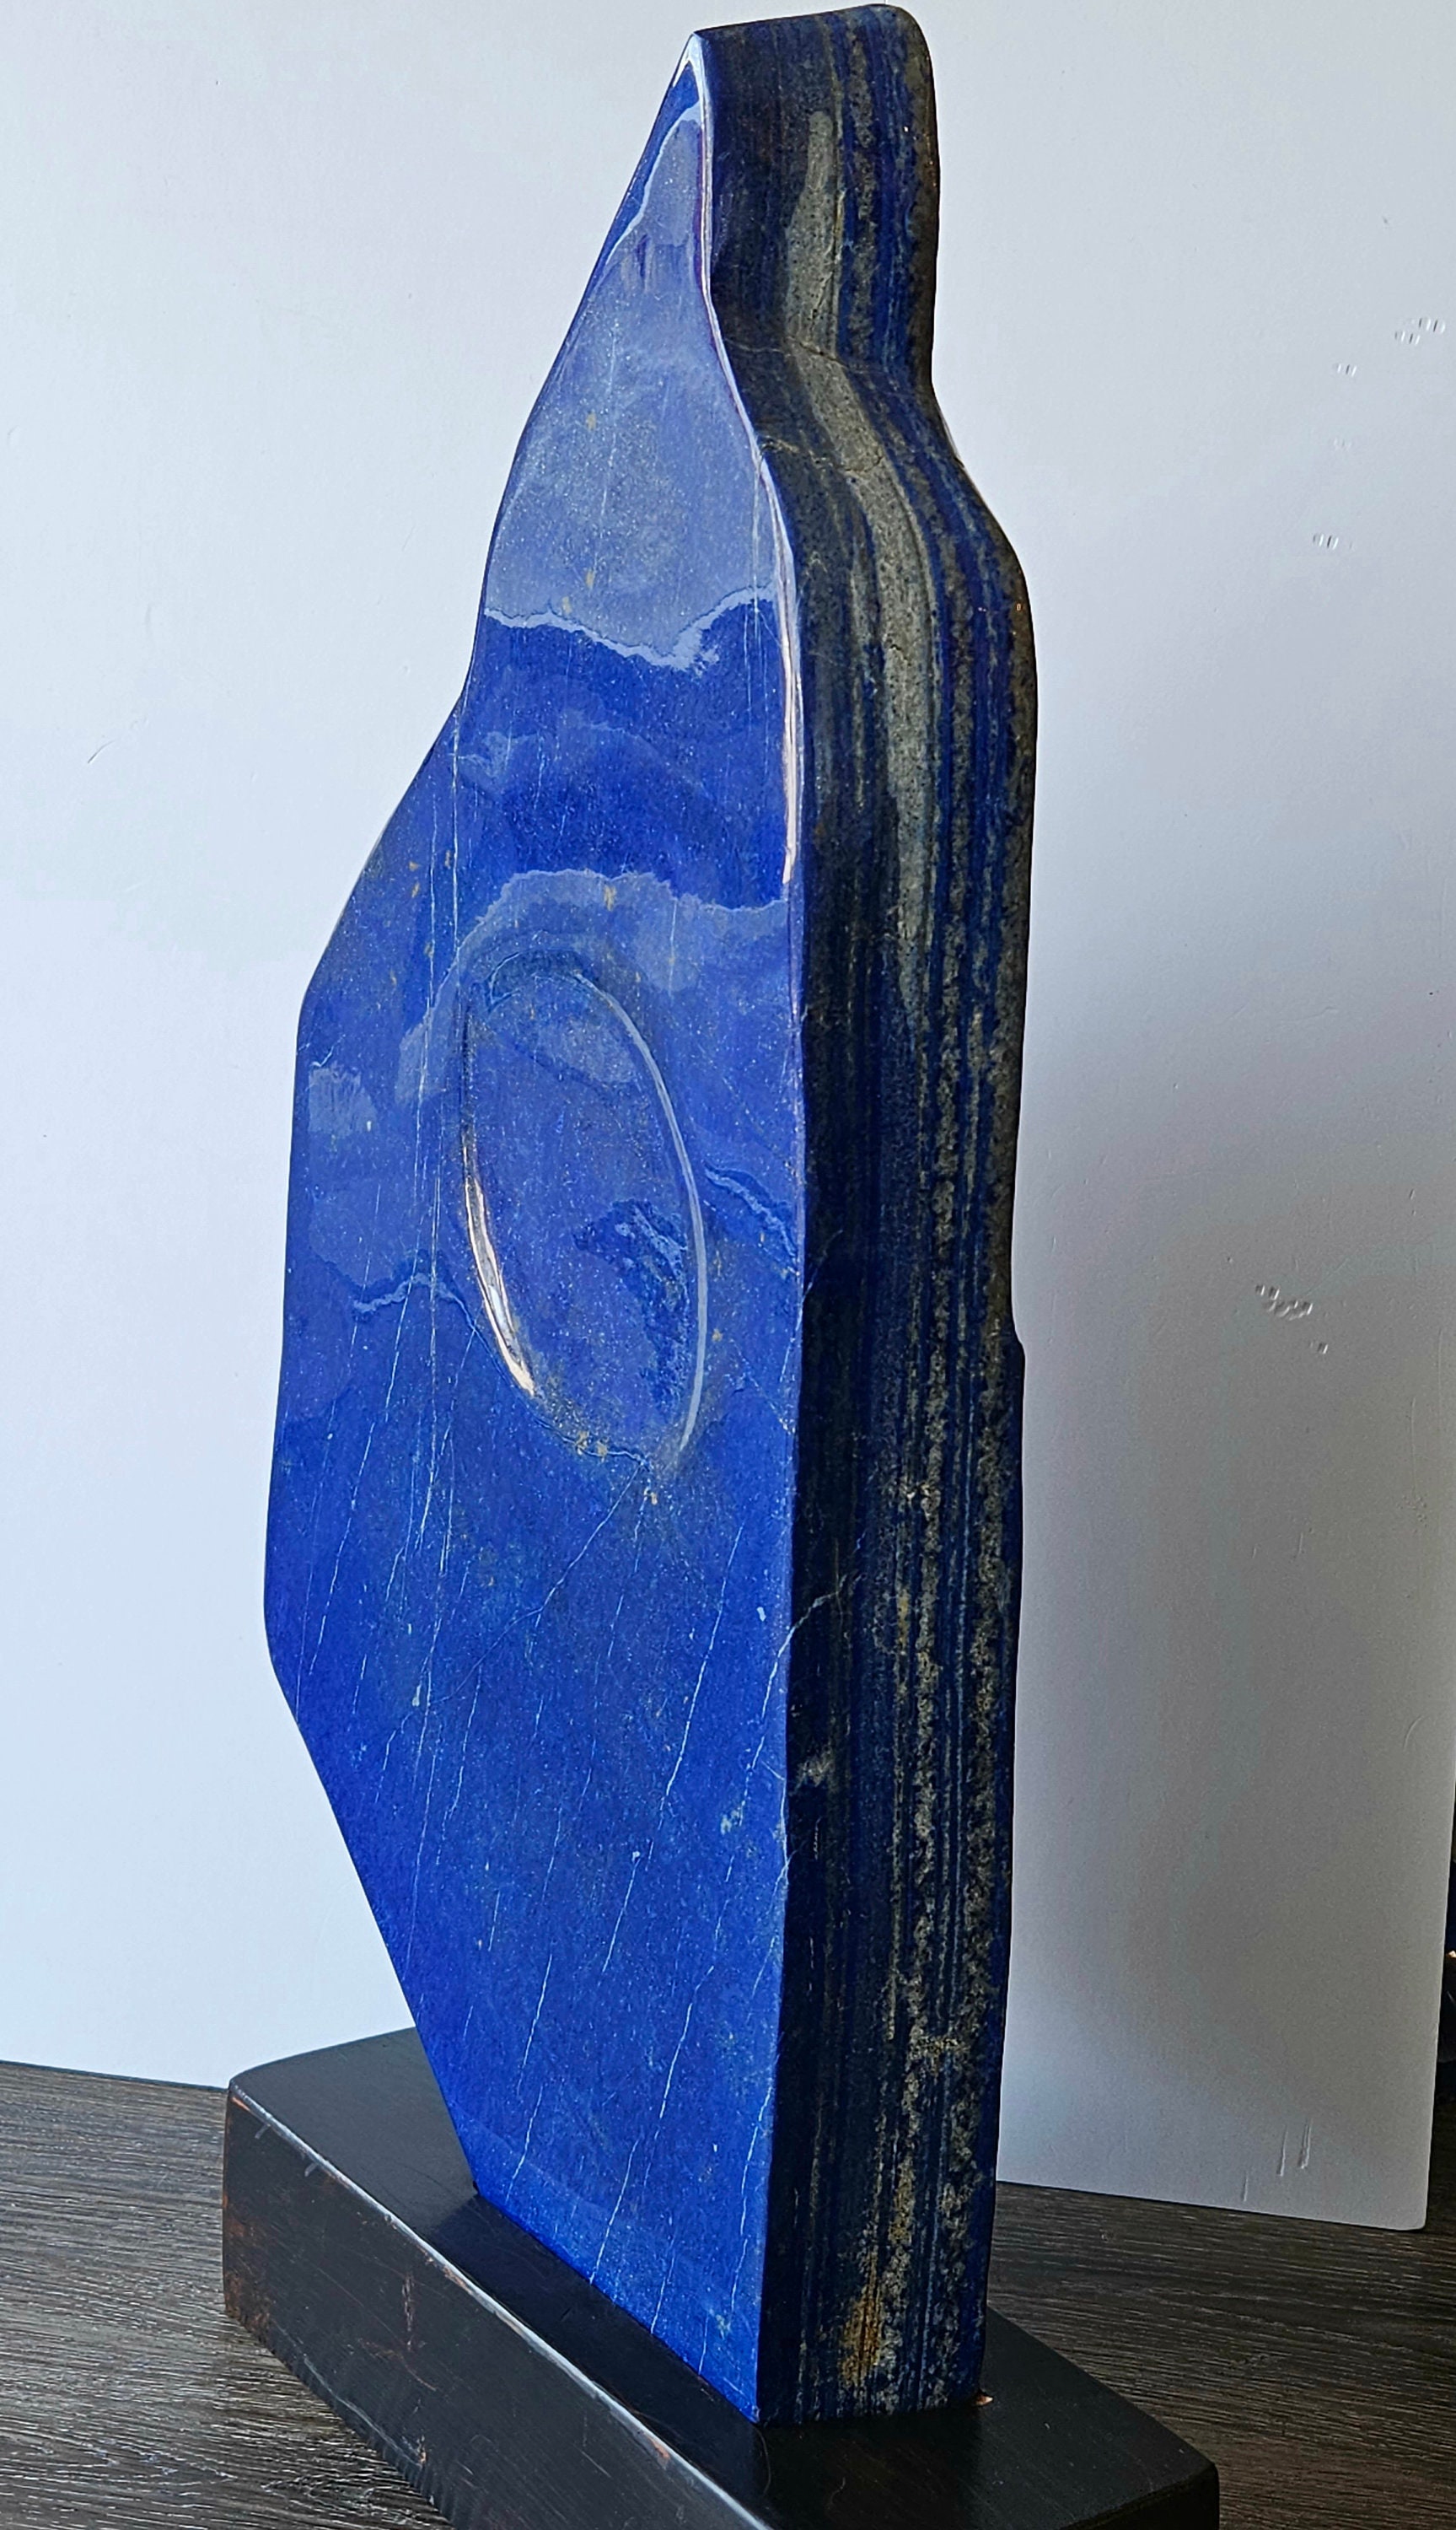 20 kg lapis lazuli top-quality decoration healing stones natural stones blue gemstone free form sculpture object from badakhshan Afghanistan